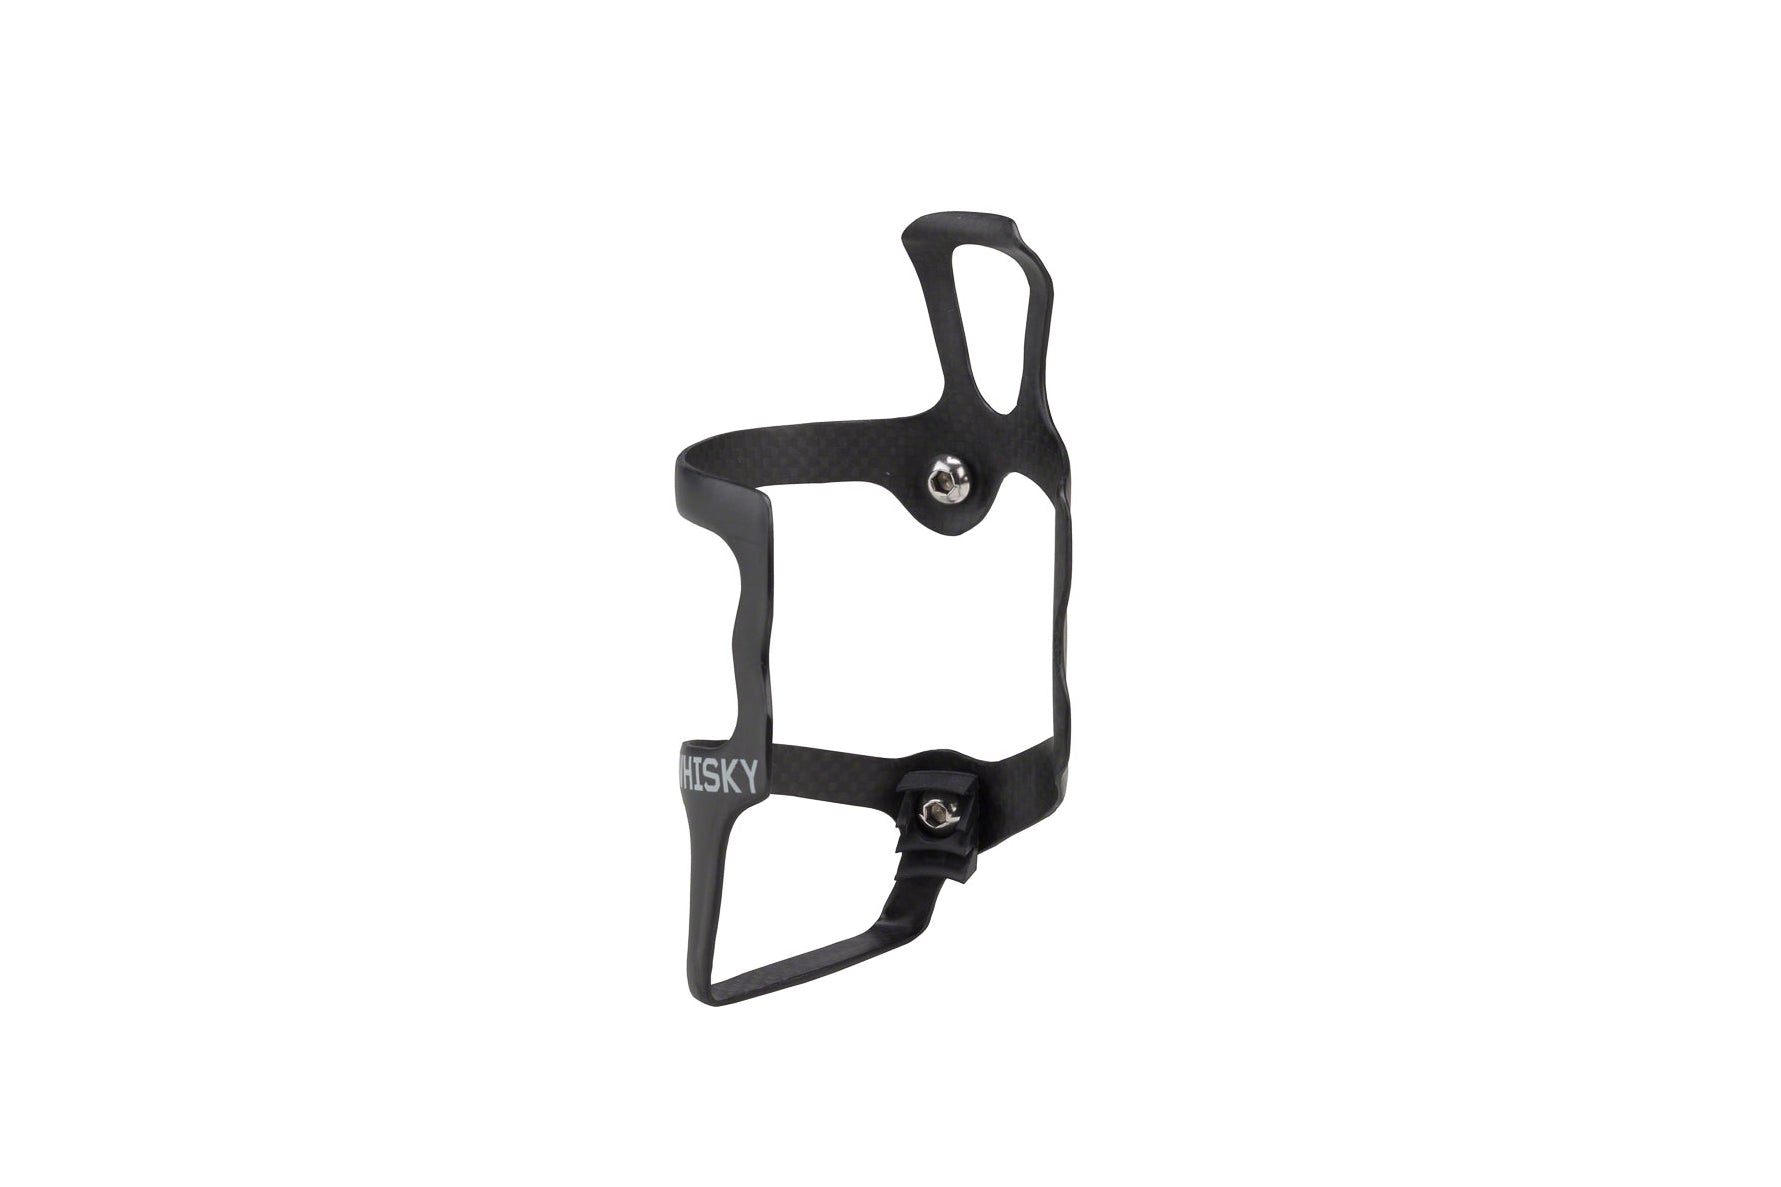 Whiskey no 9 side load bottle cage